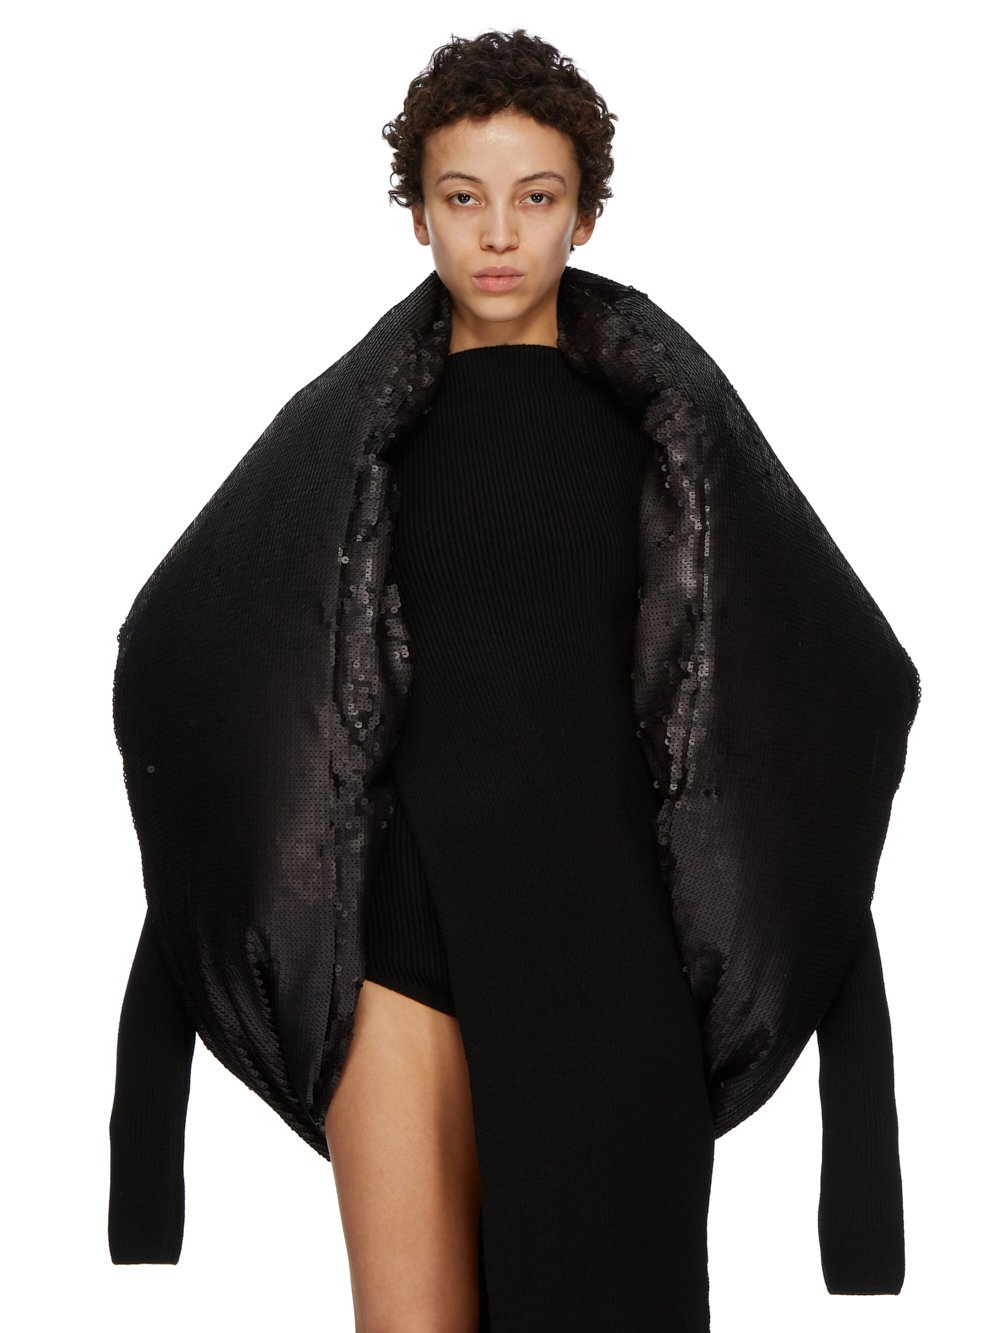 RICK OWENS FW23 LUXOR RUNWAY DONUT IN BLACK SEQUIN EMBROIDERED RECYCLED NYLON